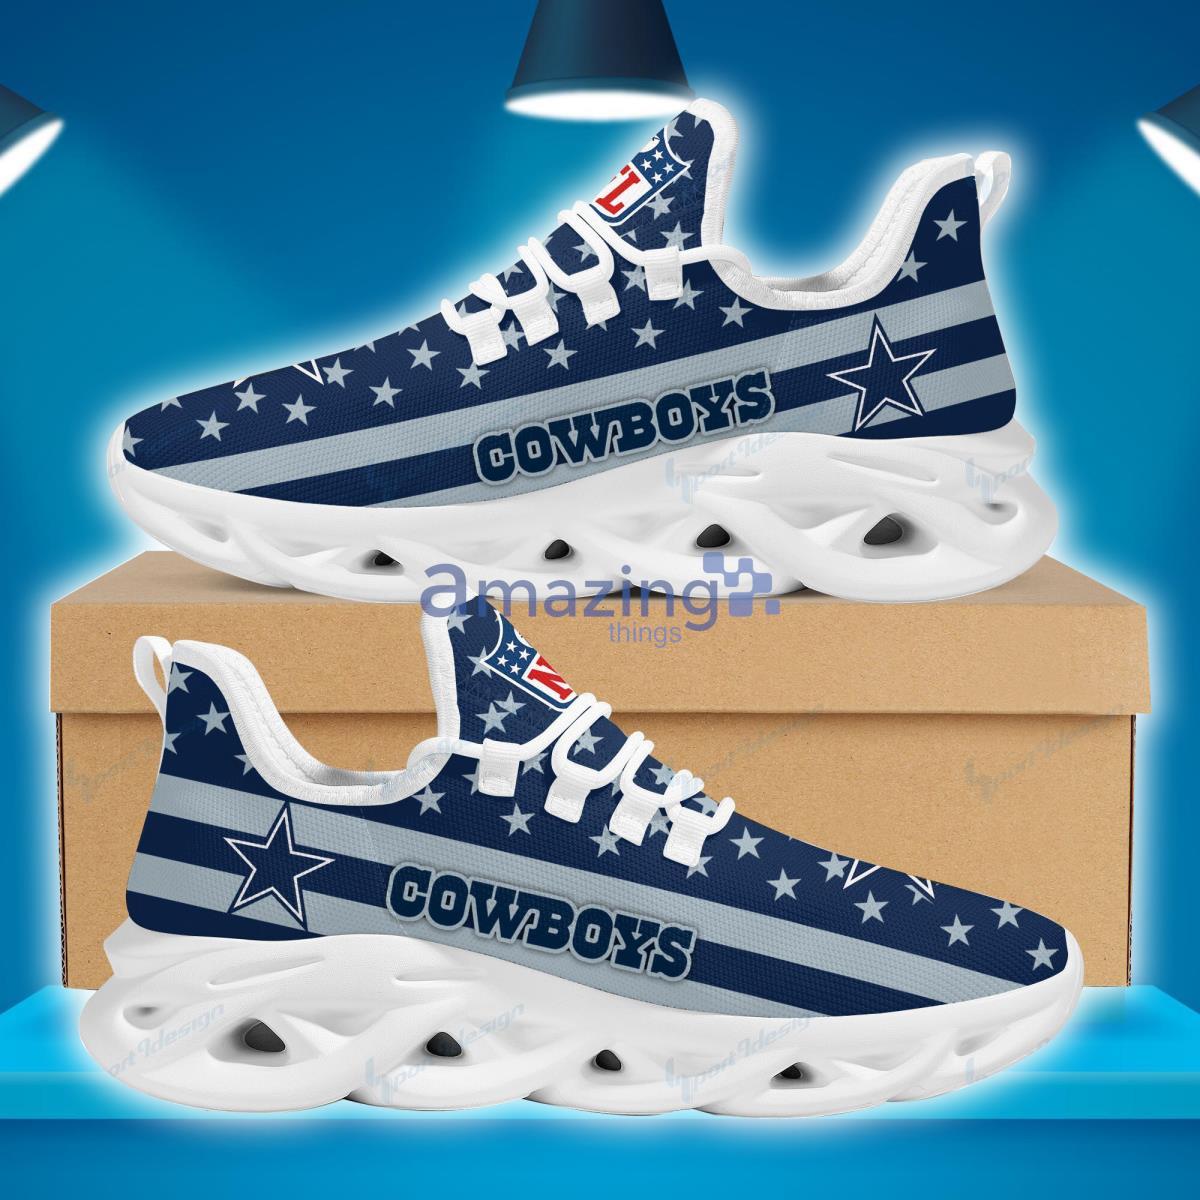 Dallas Cowboys Football Team Max Soul Shoes Hot Sneakers For Fans9